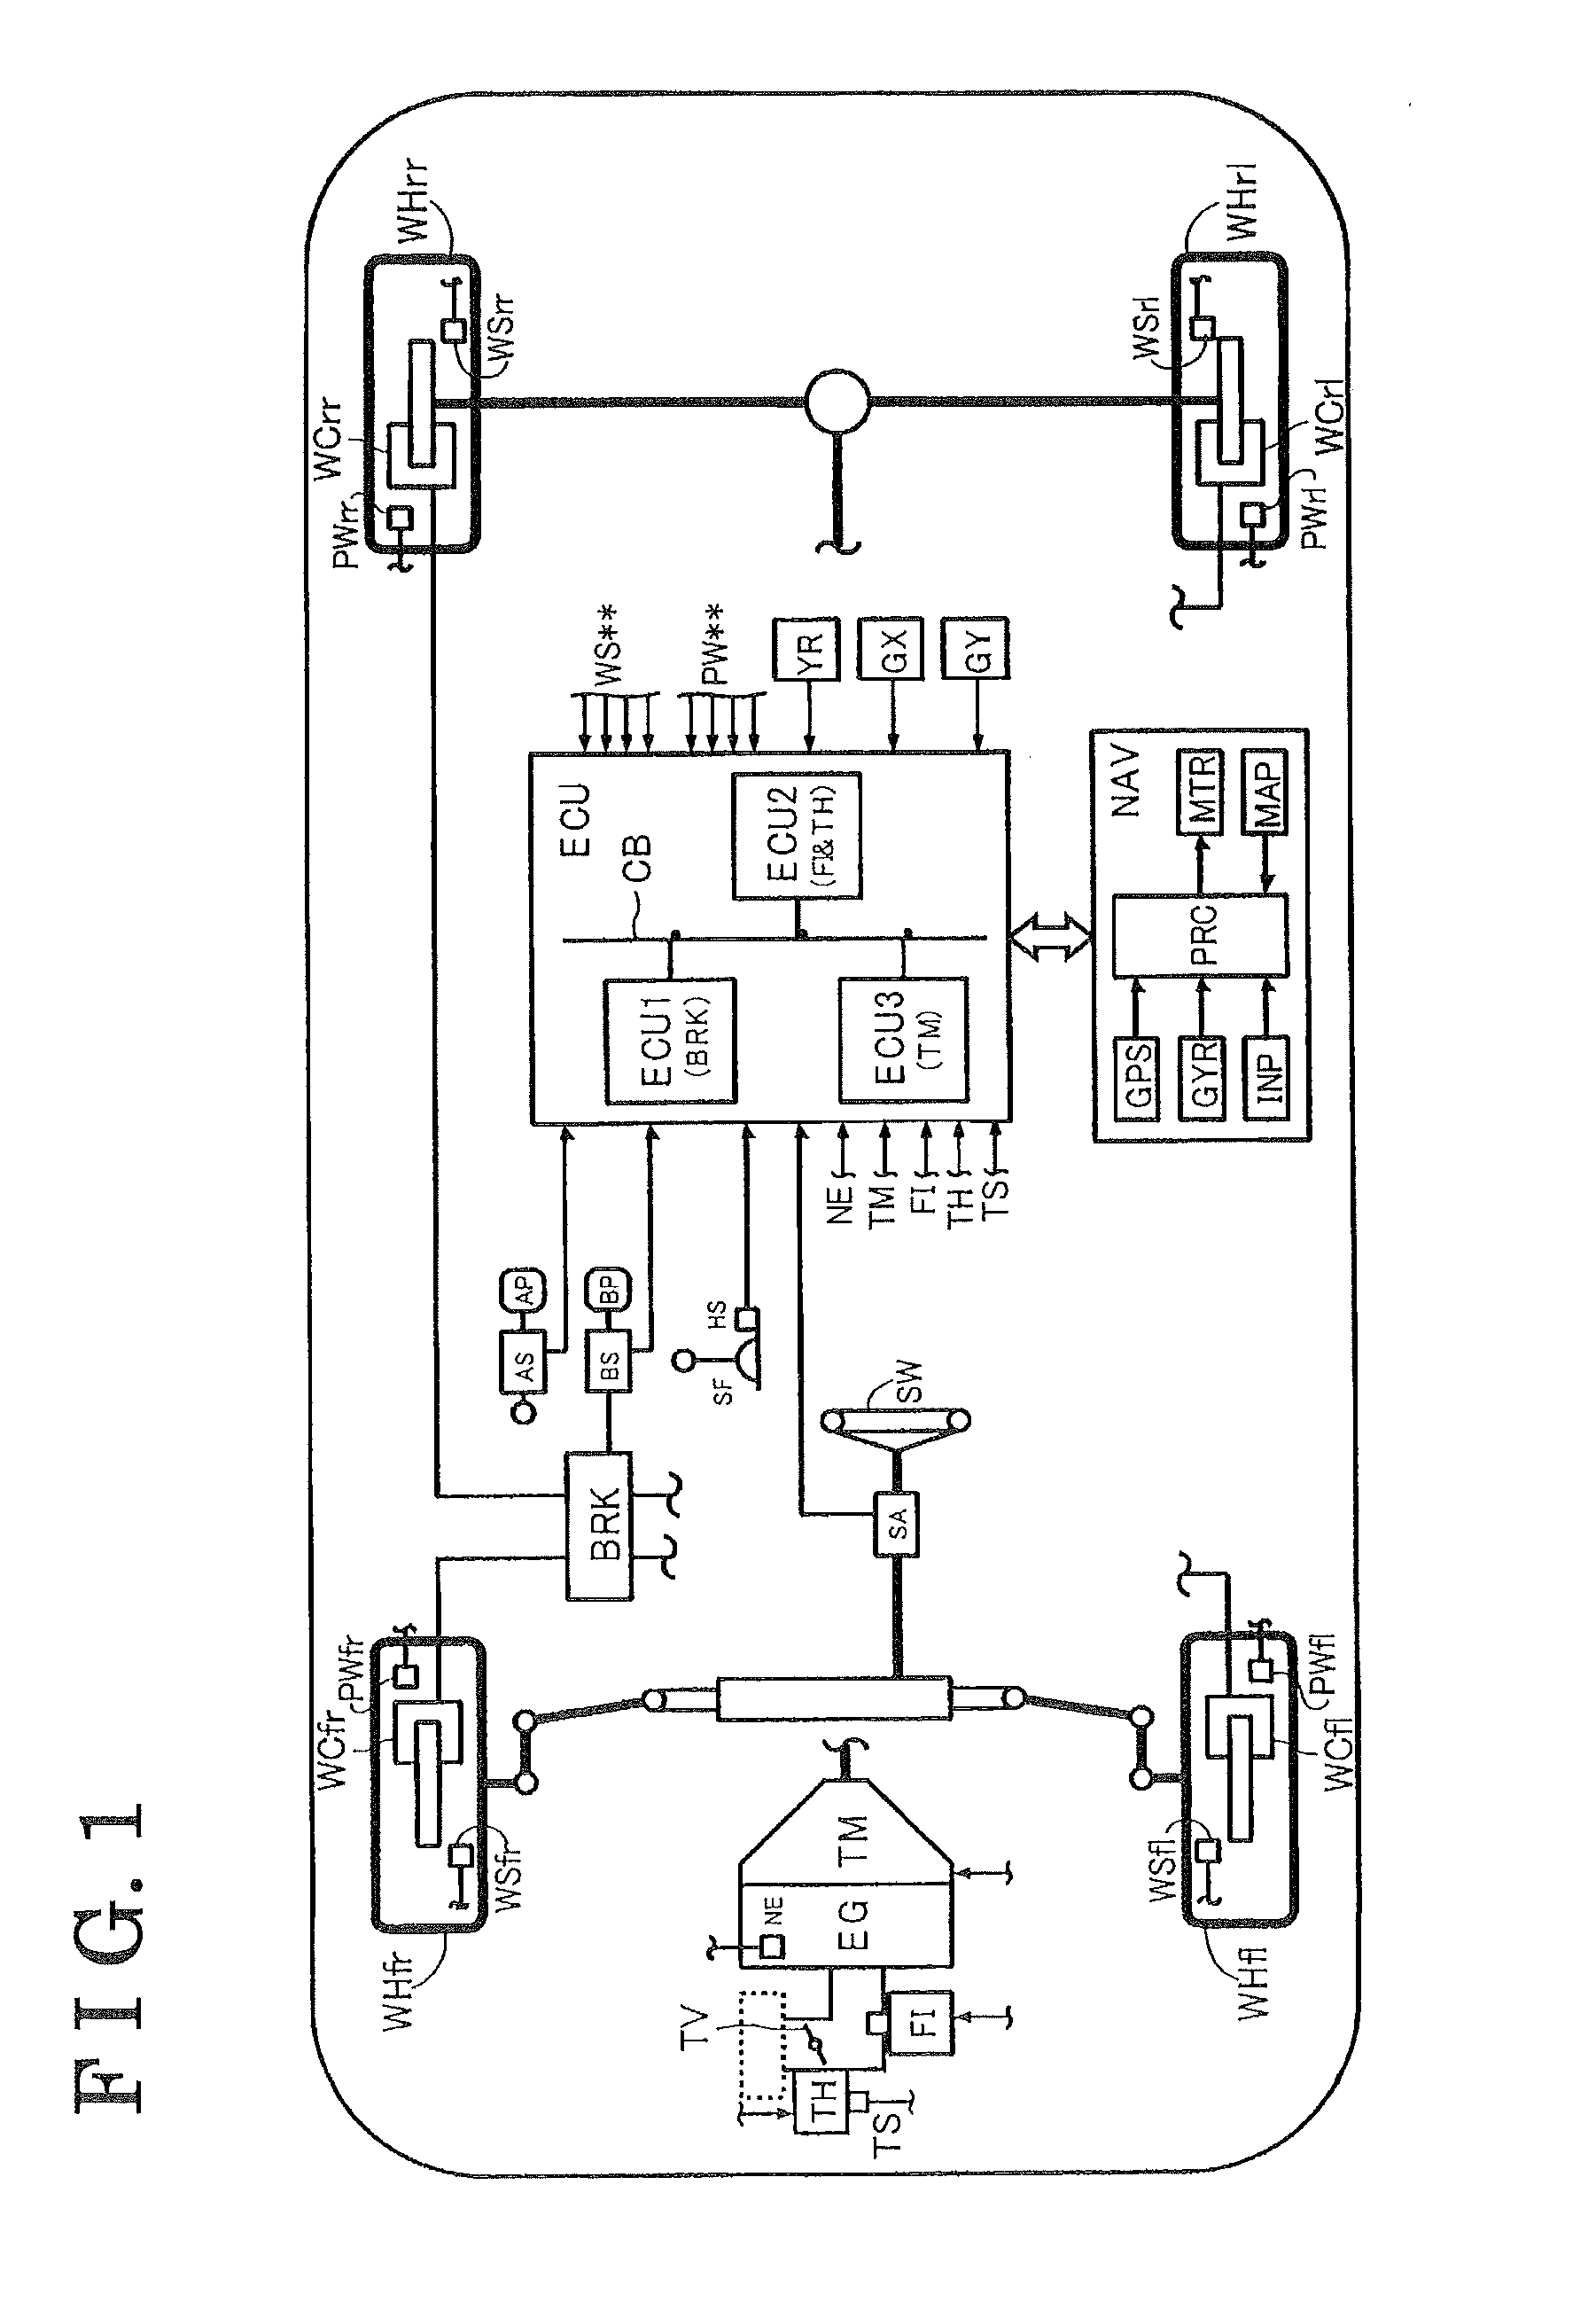 Speed control device for vehicle